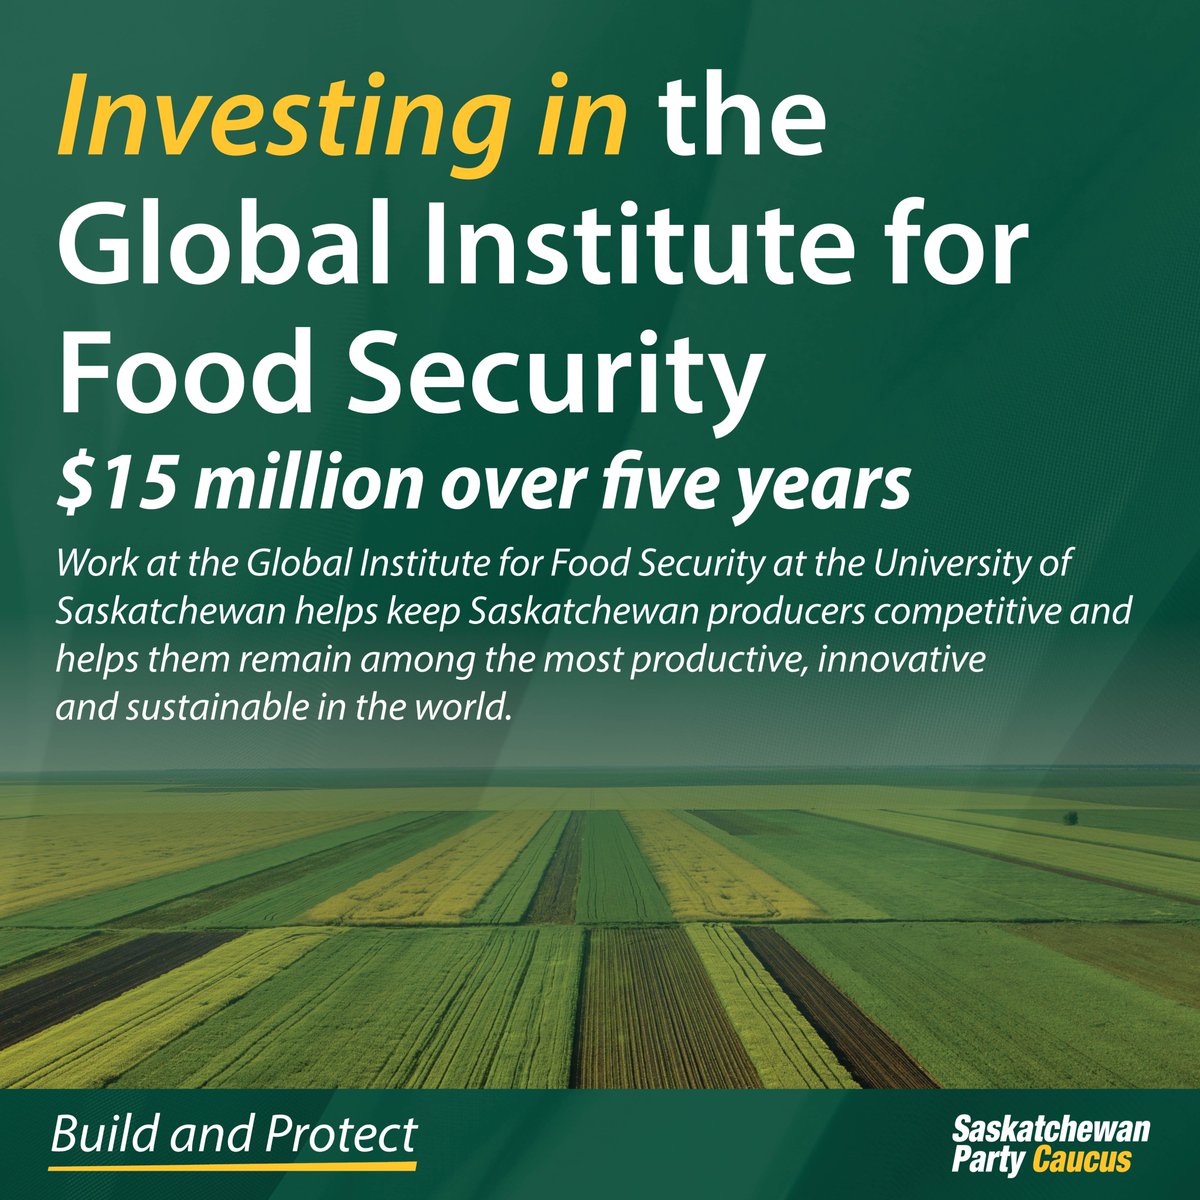 The Global Institute for Food Security provides expertise and leadership in the discovery, development and delivery of innovative solutions to produce globally sustainable food. This investment will provide $15 million over the next 5 years and help ensure this work can continue.